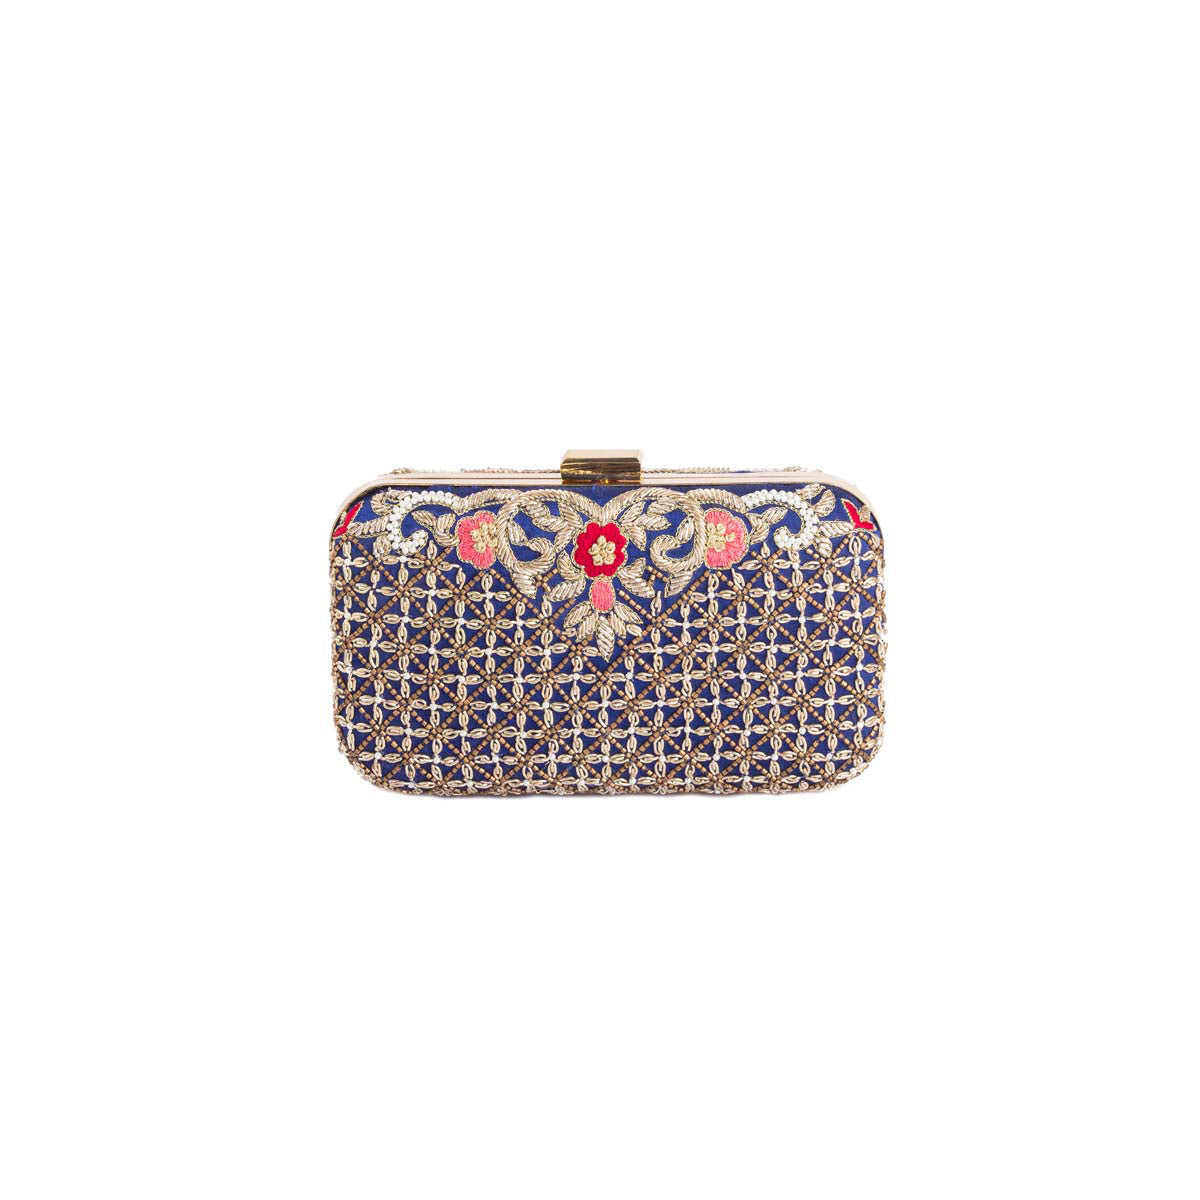 The perfect muse-worthy medley of florals and fashion, this blue clutch boasts of zardosi embroidered flowers and intricate lattices.